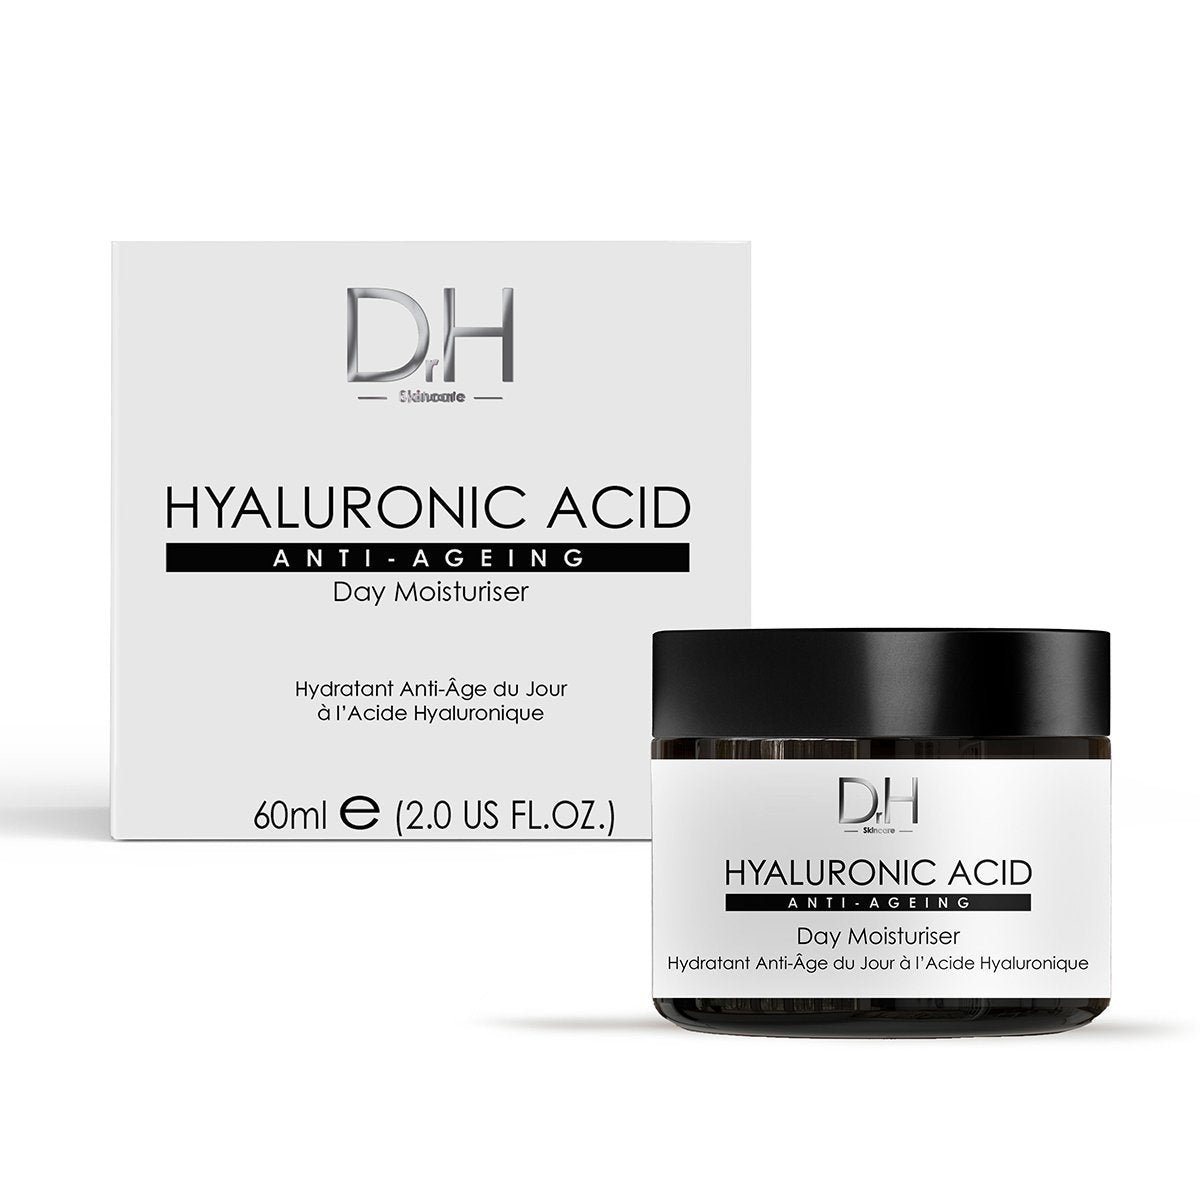 Dr H Hyaluronic Acid Routine - skinChemists